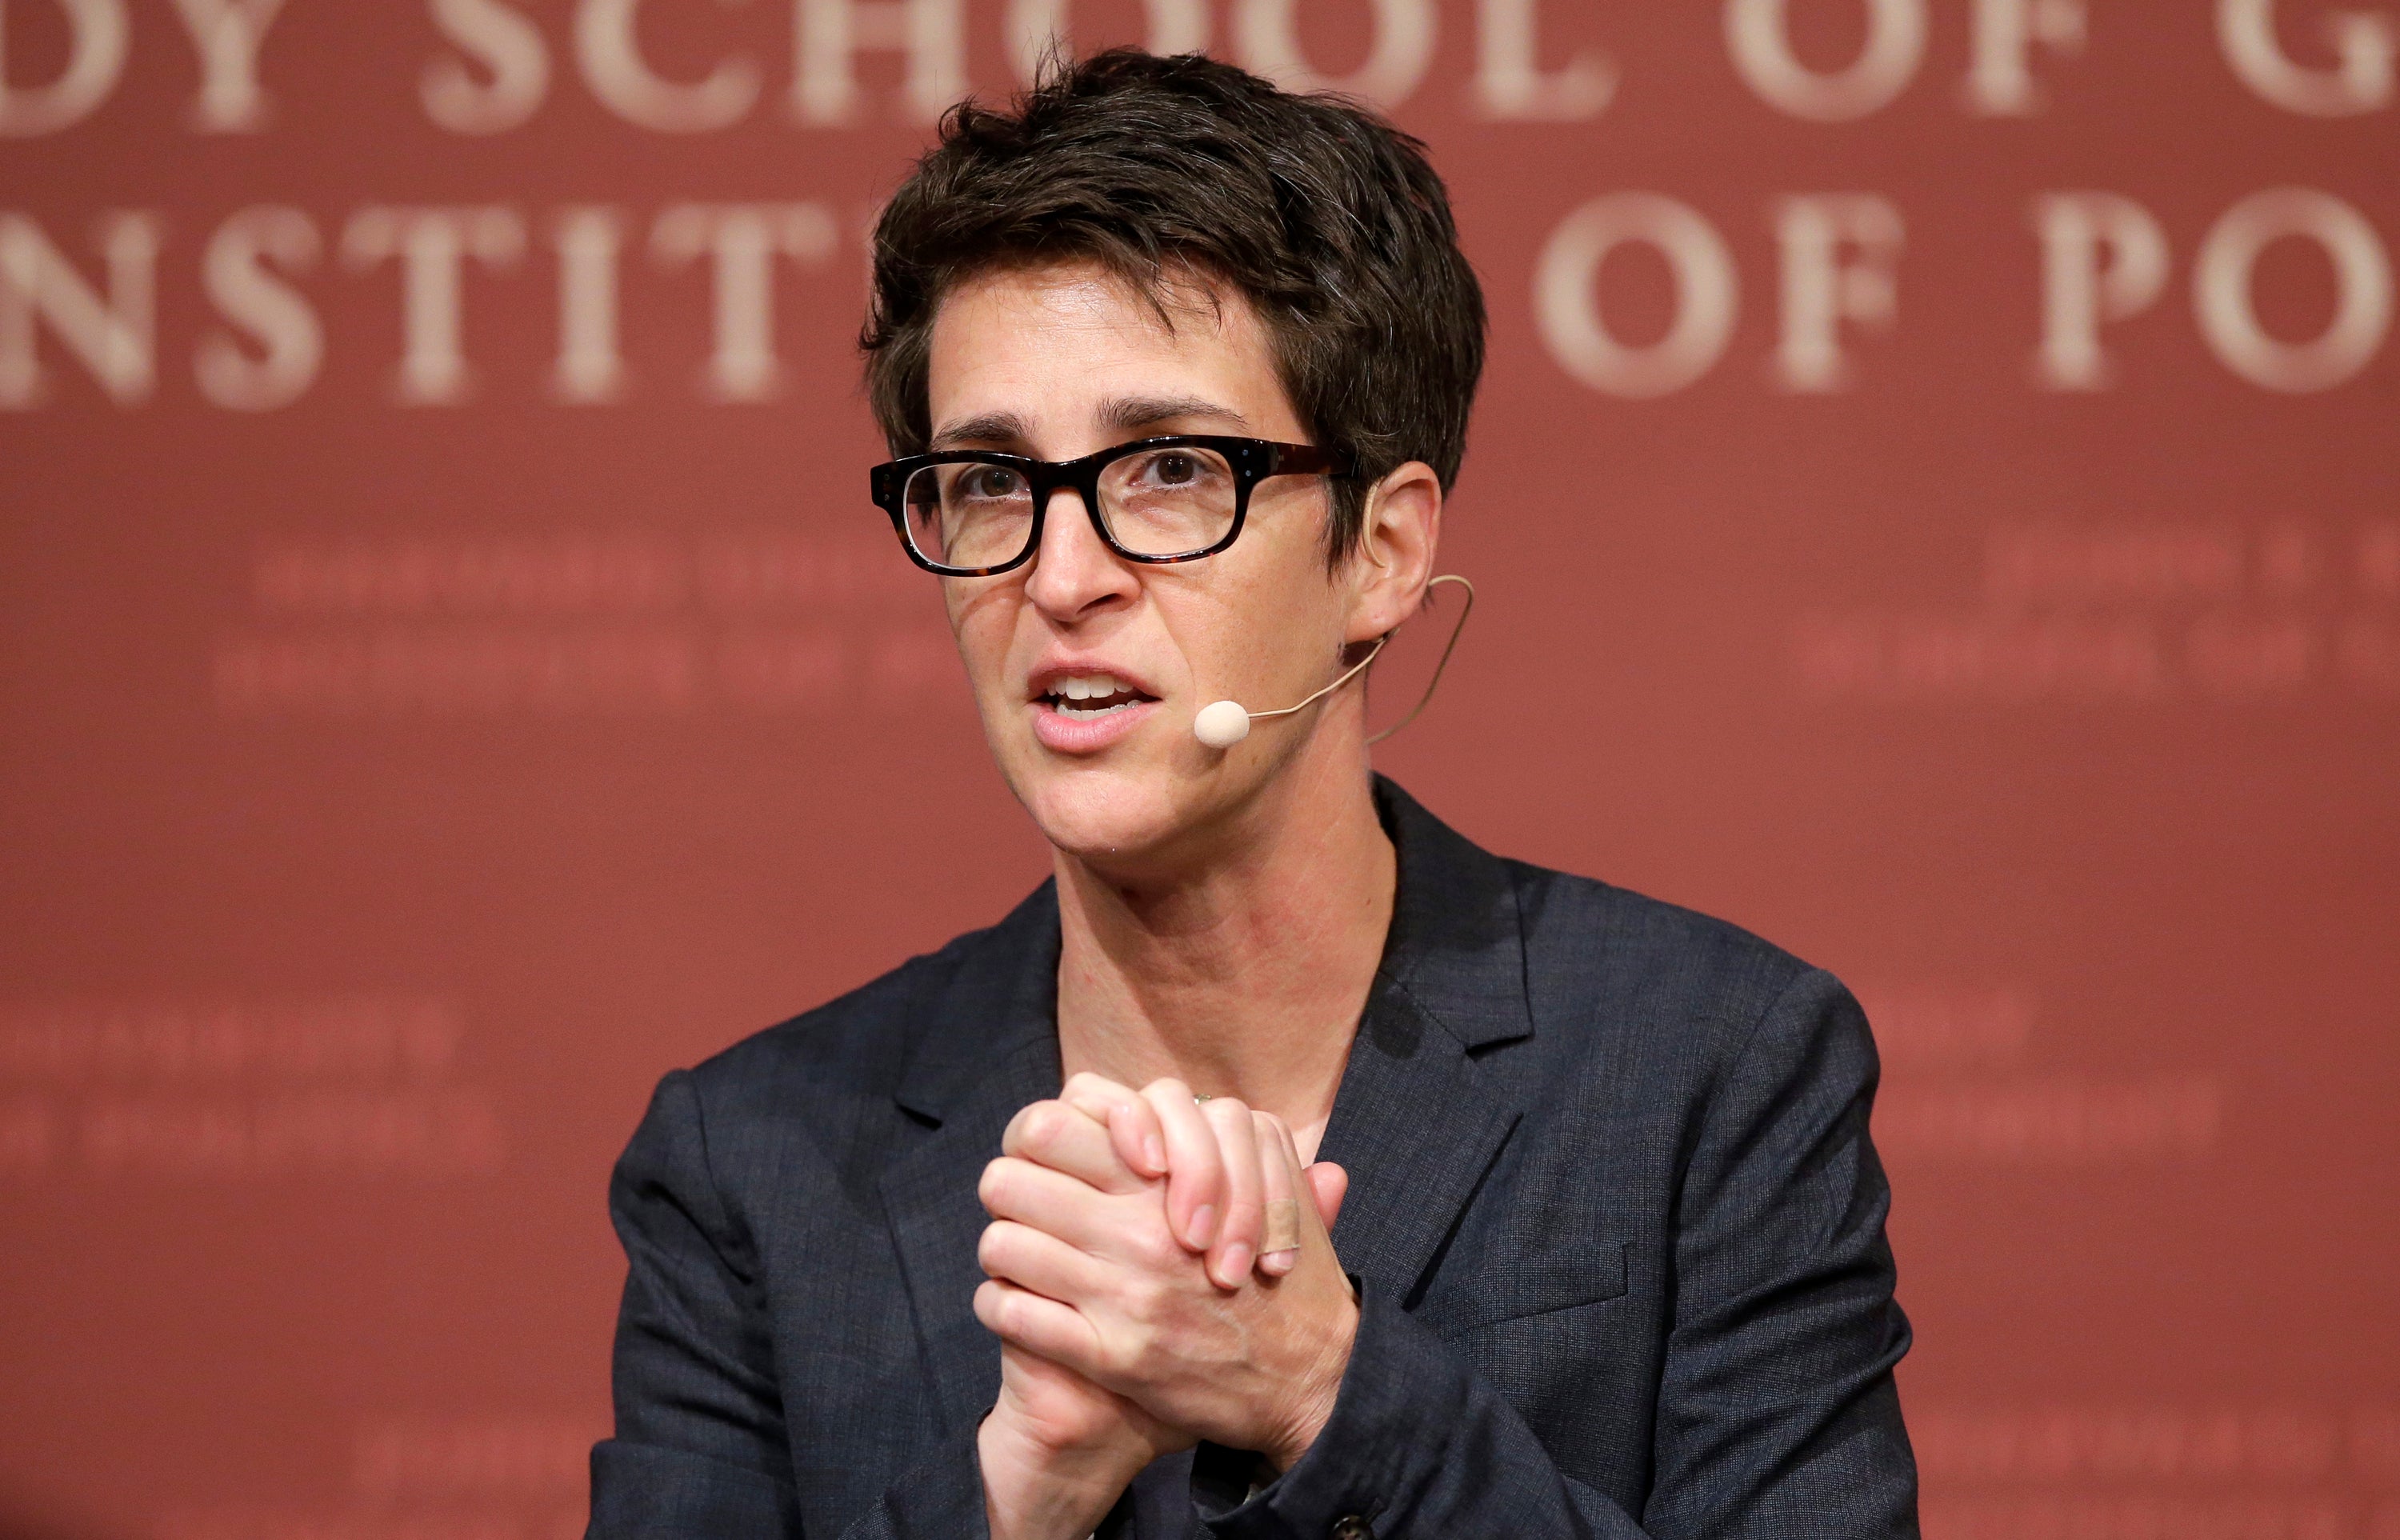 Rachel Maddow returns to MSNBC, will switch to once a week The